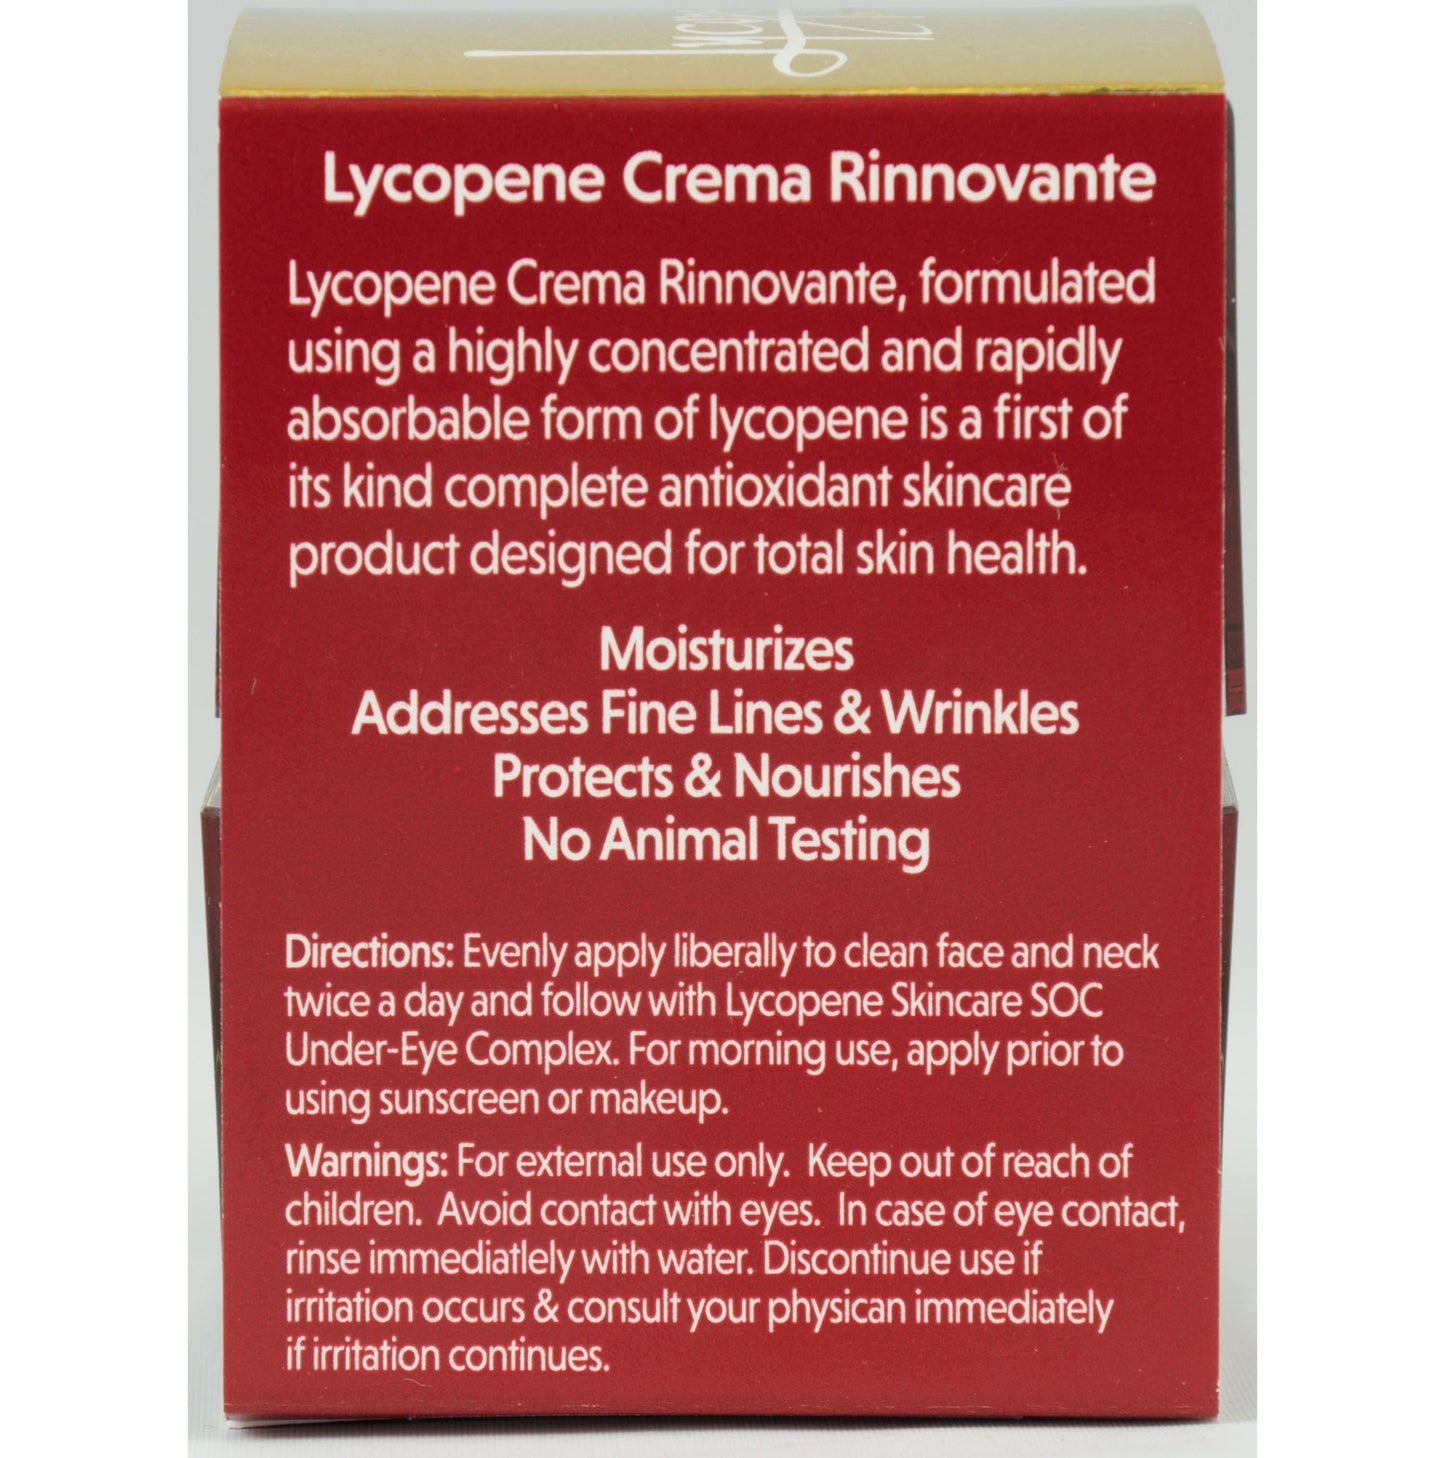 Buy 2 And Save 10% Lycopene Crema Rinnovante - Anti-Aging Cream, European Fashion Models Favorite with Astaxanthin, with 20 Natural Organic Botanicals - Save on 2 Jars